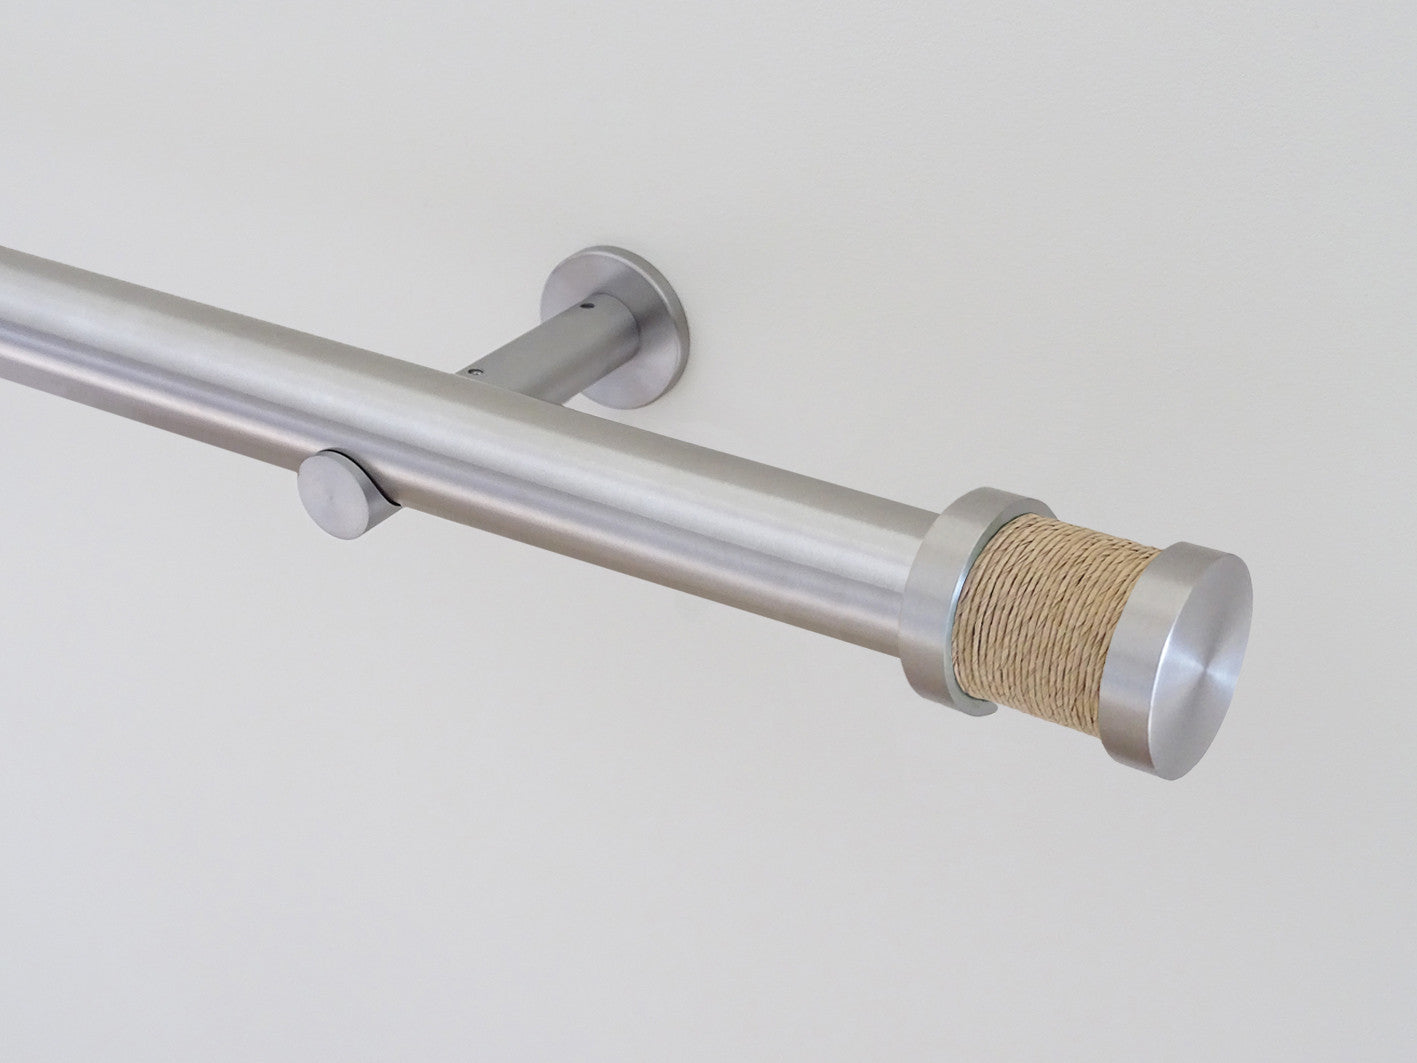 30mm diameter stainless steel curtain pole collection with oat twine Groove finials